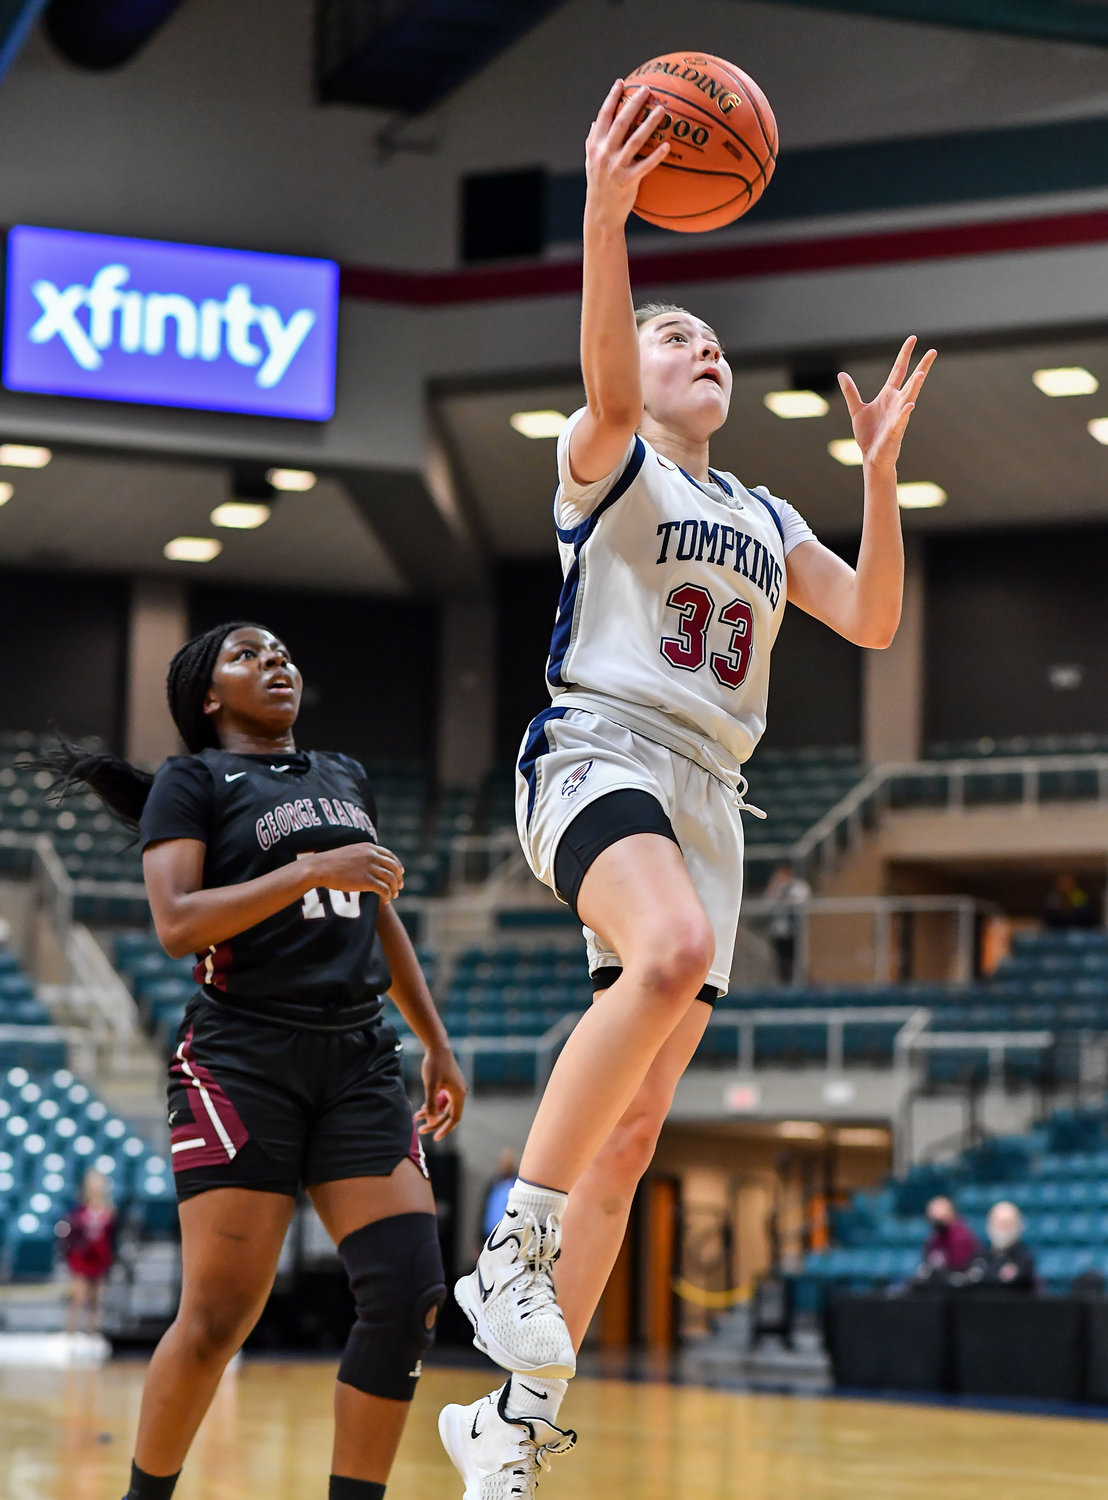 Katy Tx. Feb 15, 2022:  Tompkins Macy Spencer #33 drives to the basket during the Bi-District playoff, Tompkins vs George Ranch. (Photo by Mark Goodman / Katy Times)